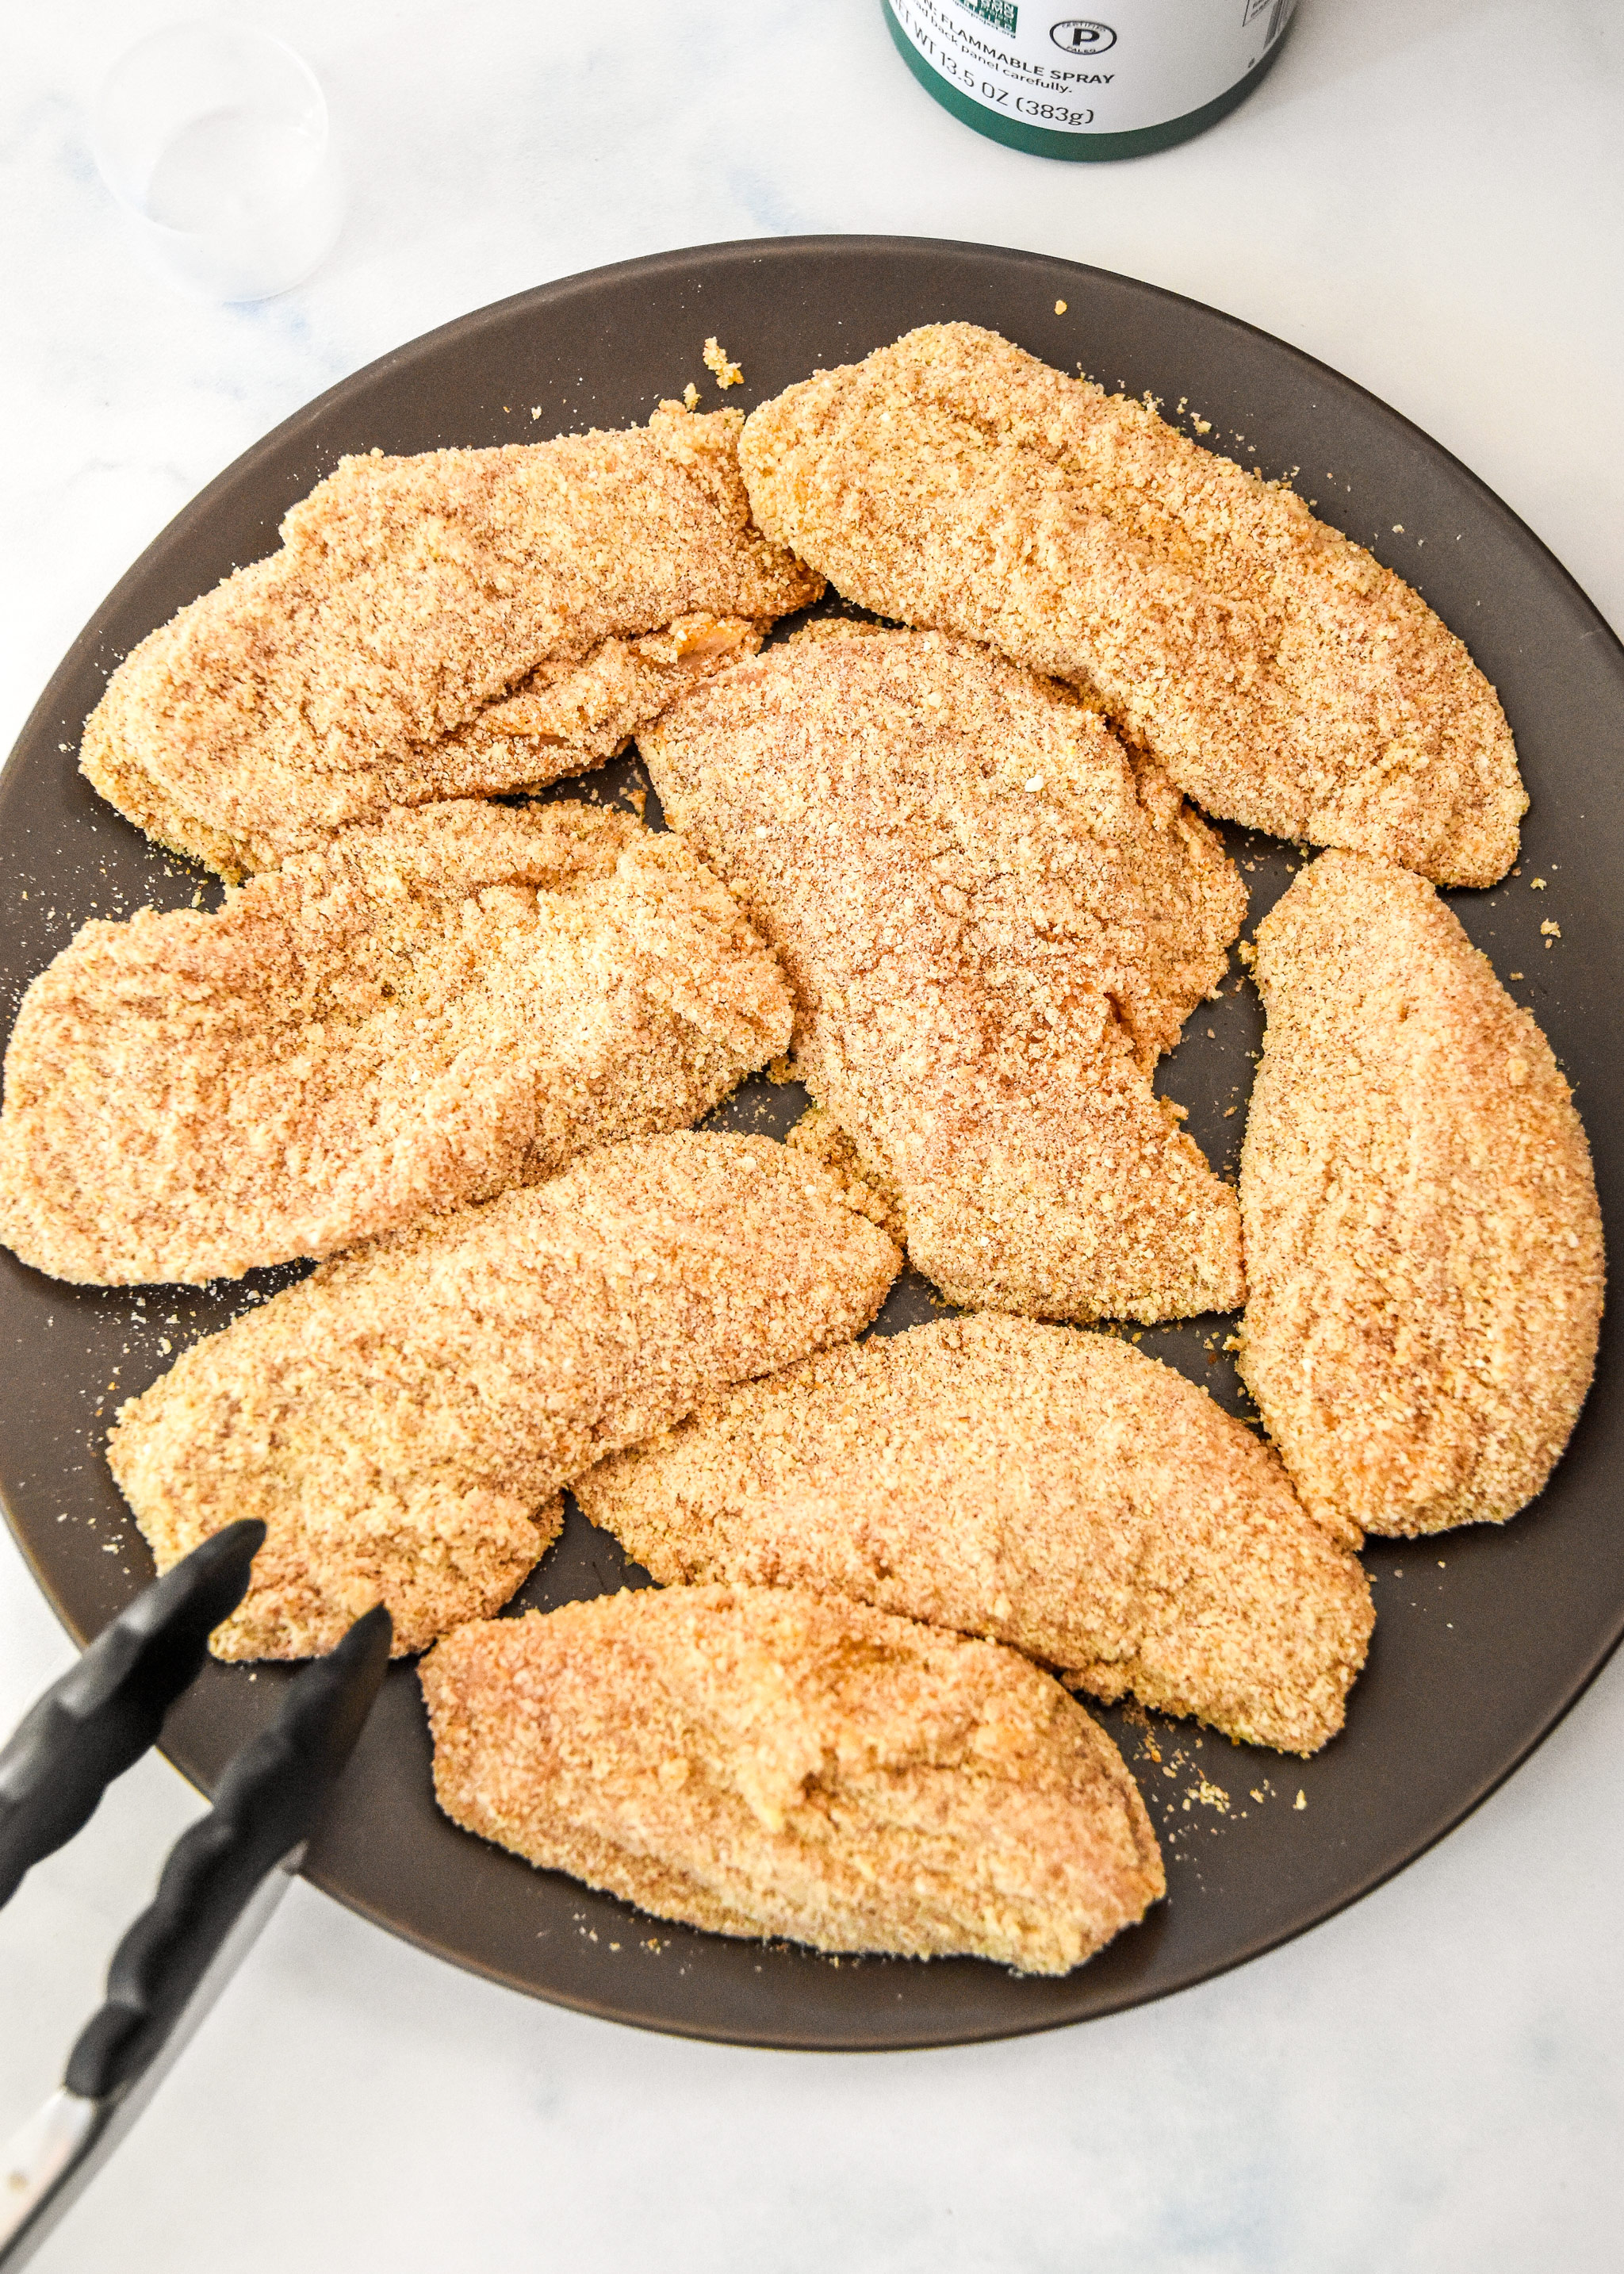 breaded chicken tenders on a plate before cooking.